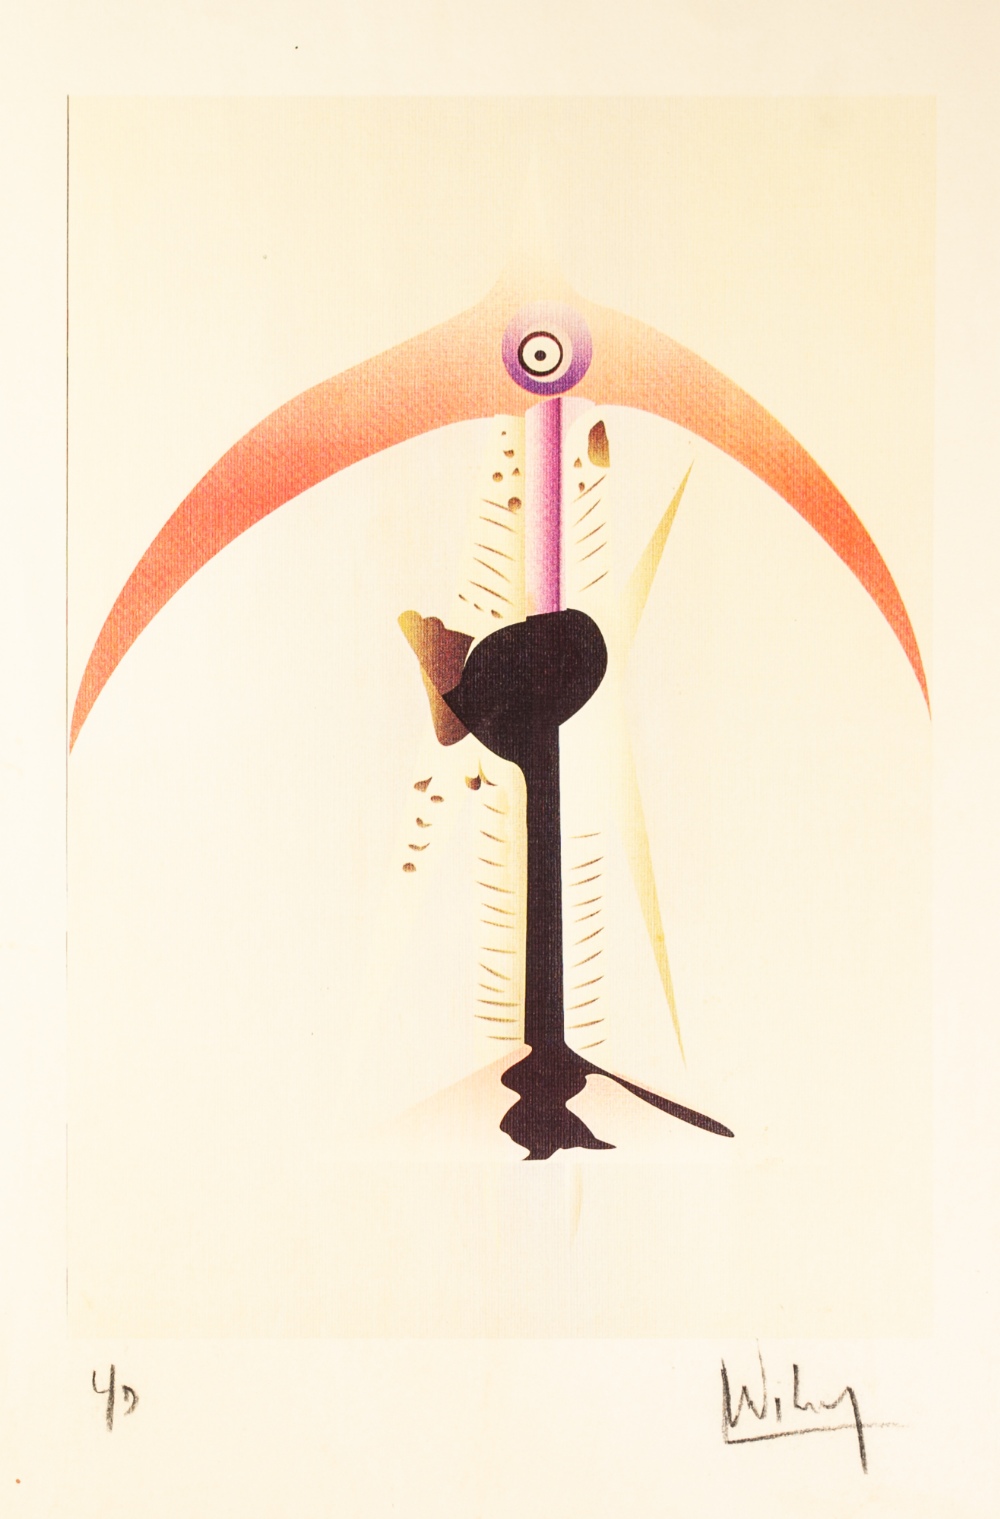 WILFREDO LAM (CUBAN 1902- 1982) ARTIST SIGNED COLOURED LITHOGRAPHIC PRINT with 'Ministerio de